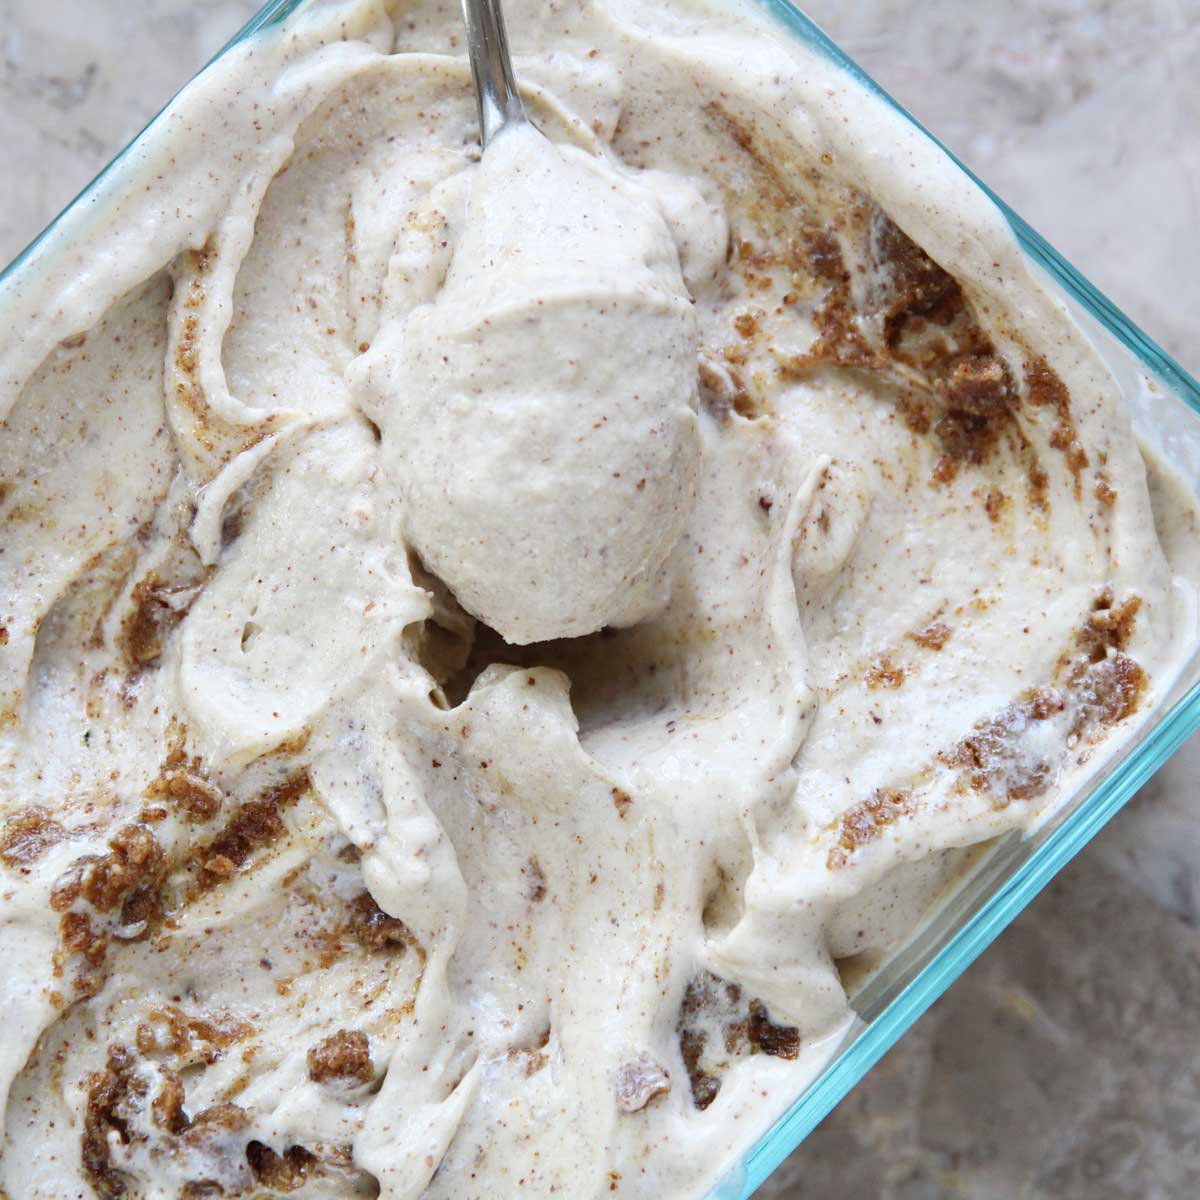 You can eat pecan pie ice cream soft serve or freeze for later